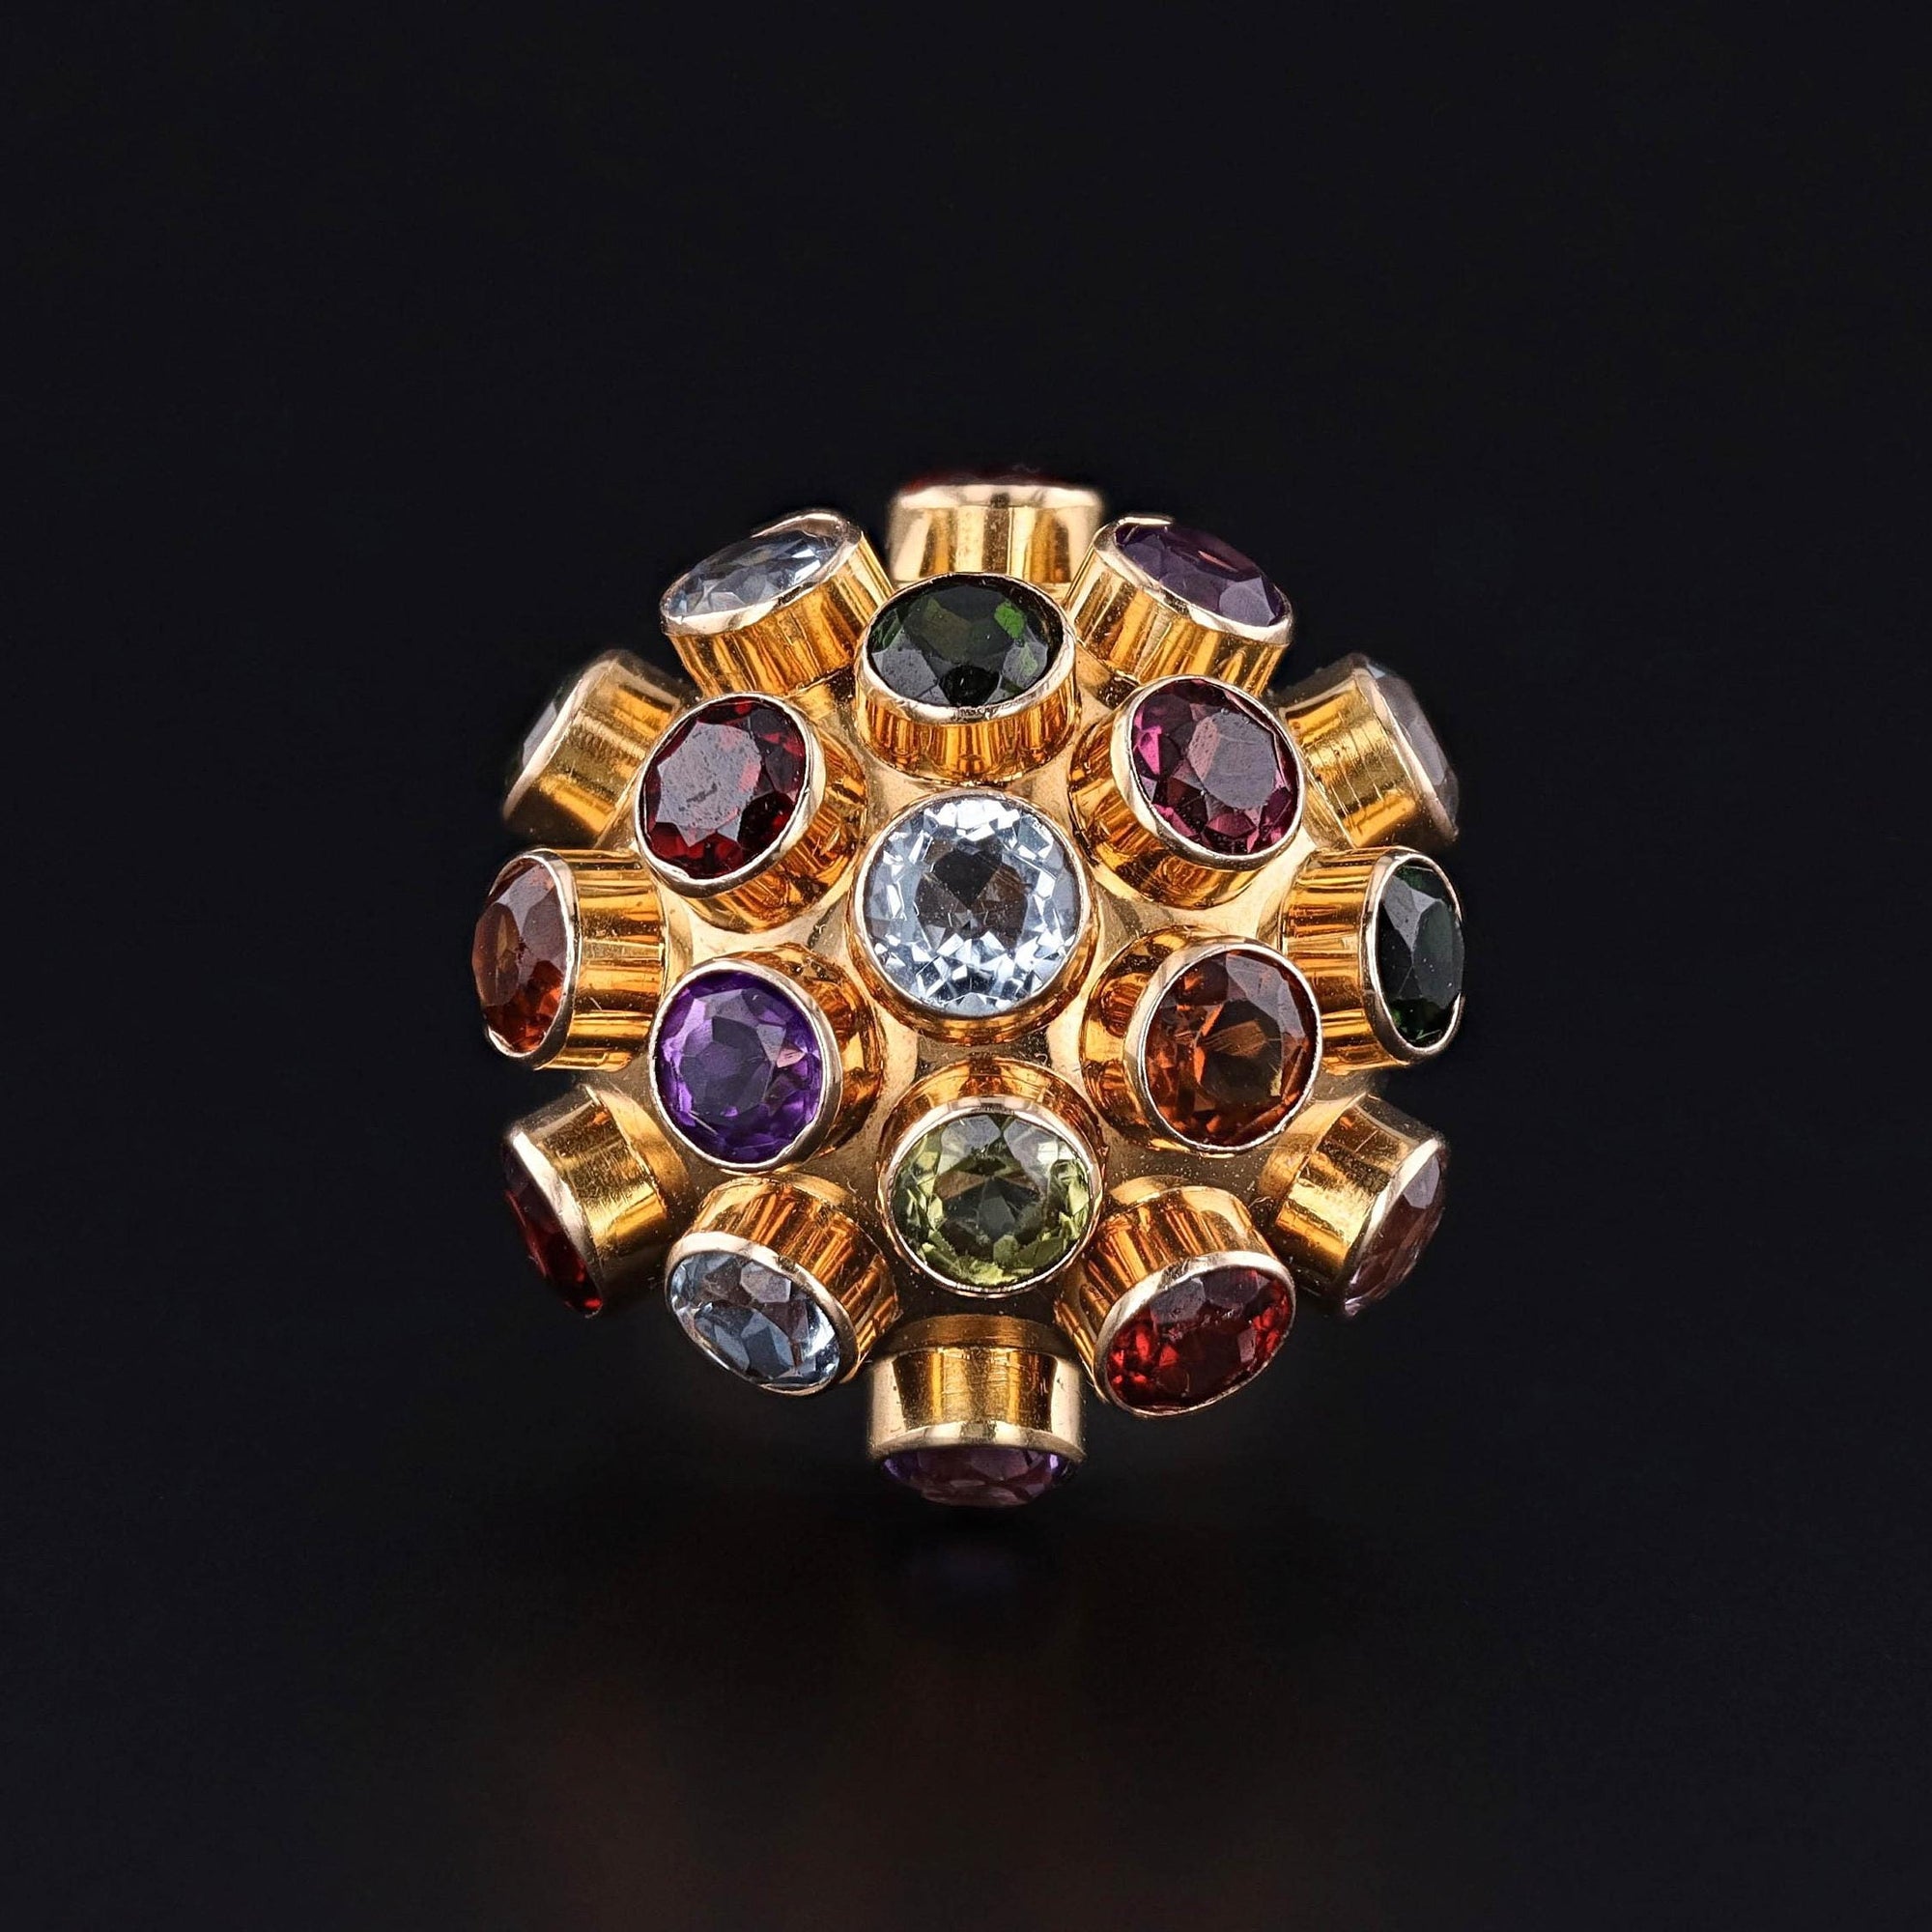 A vintage gemstone sputnik ring of 18k gold. This ring celebrates the allure of the Space Race in the 1960s and is designed to look like a satellite.